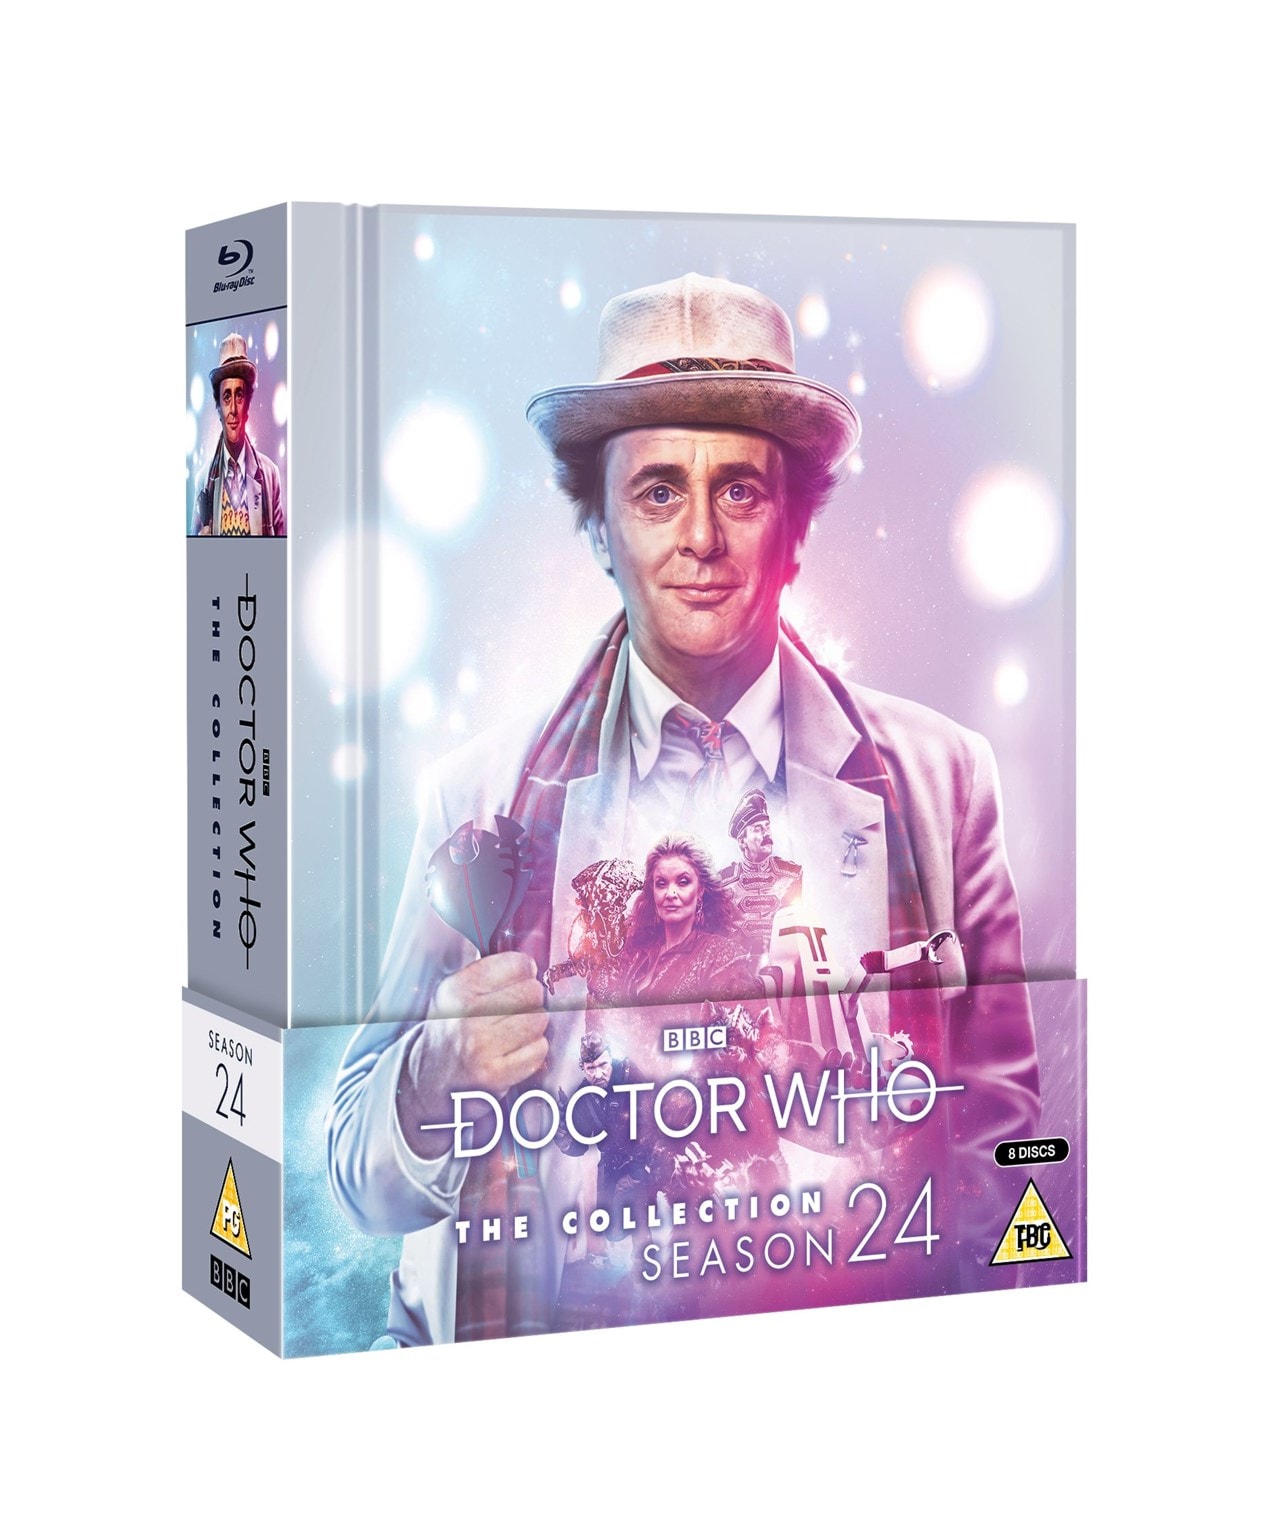 Doctor Who The Collection Season 24 Limited Edition Box Set Blu